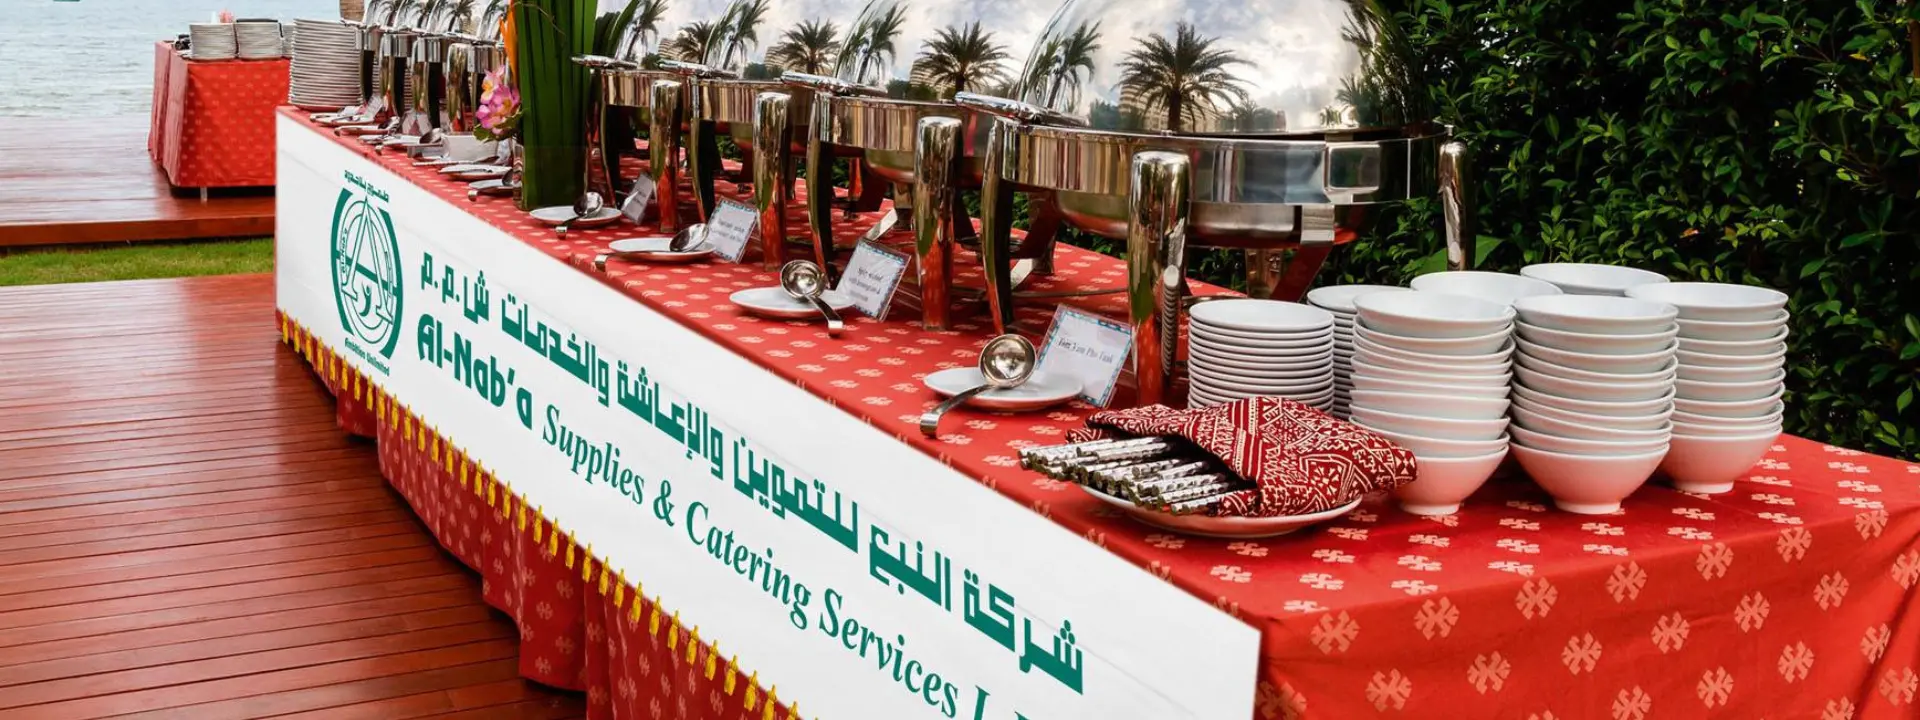 Al-Nab‘a-One of the Event Catering company in oman